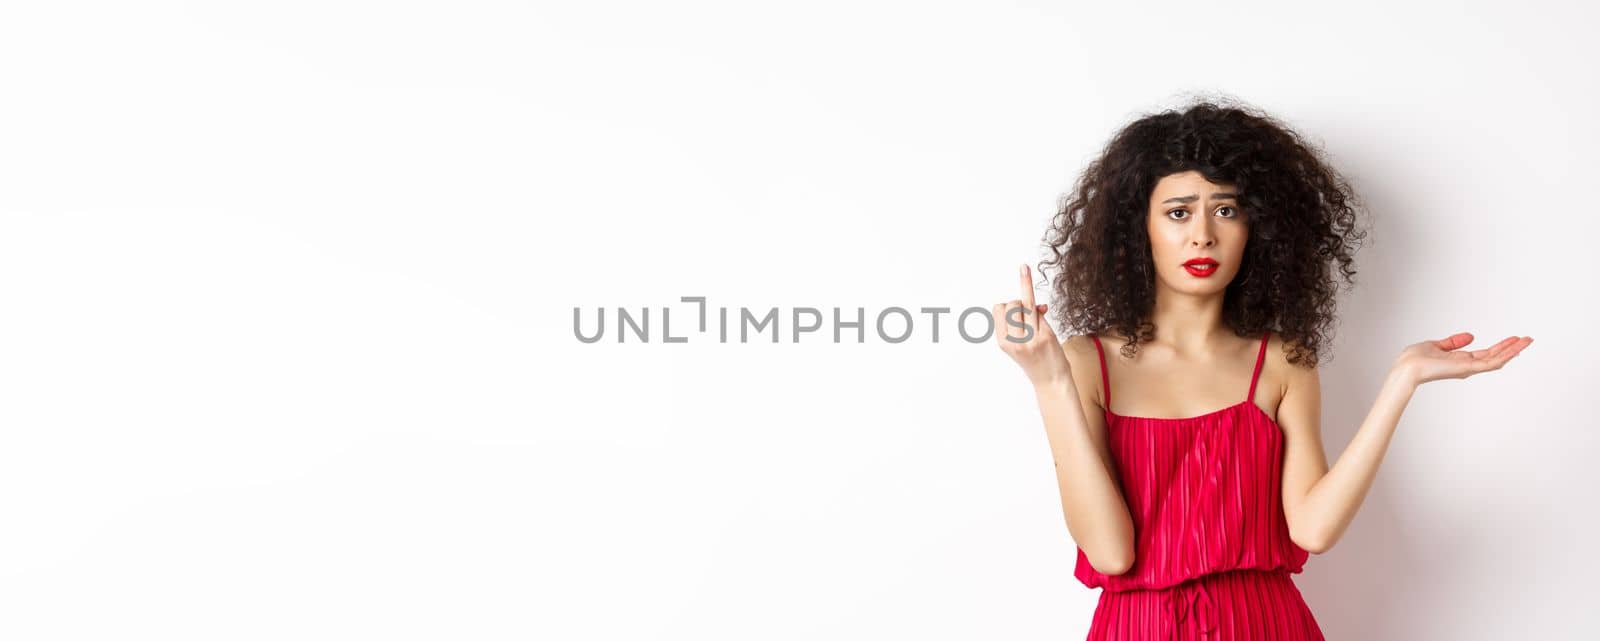 Sad girlfriend with curly hair, showing finger without ring and look confused, complaining at indecisive boyfriend, wanting to get married, standing on white background.